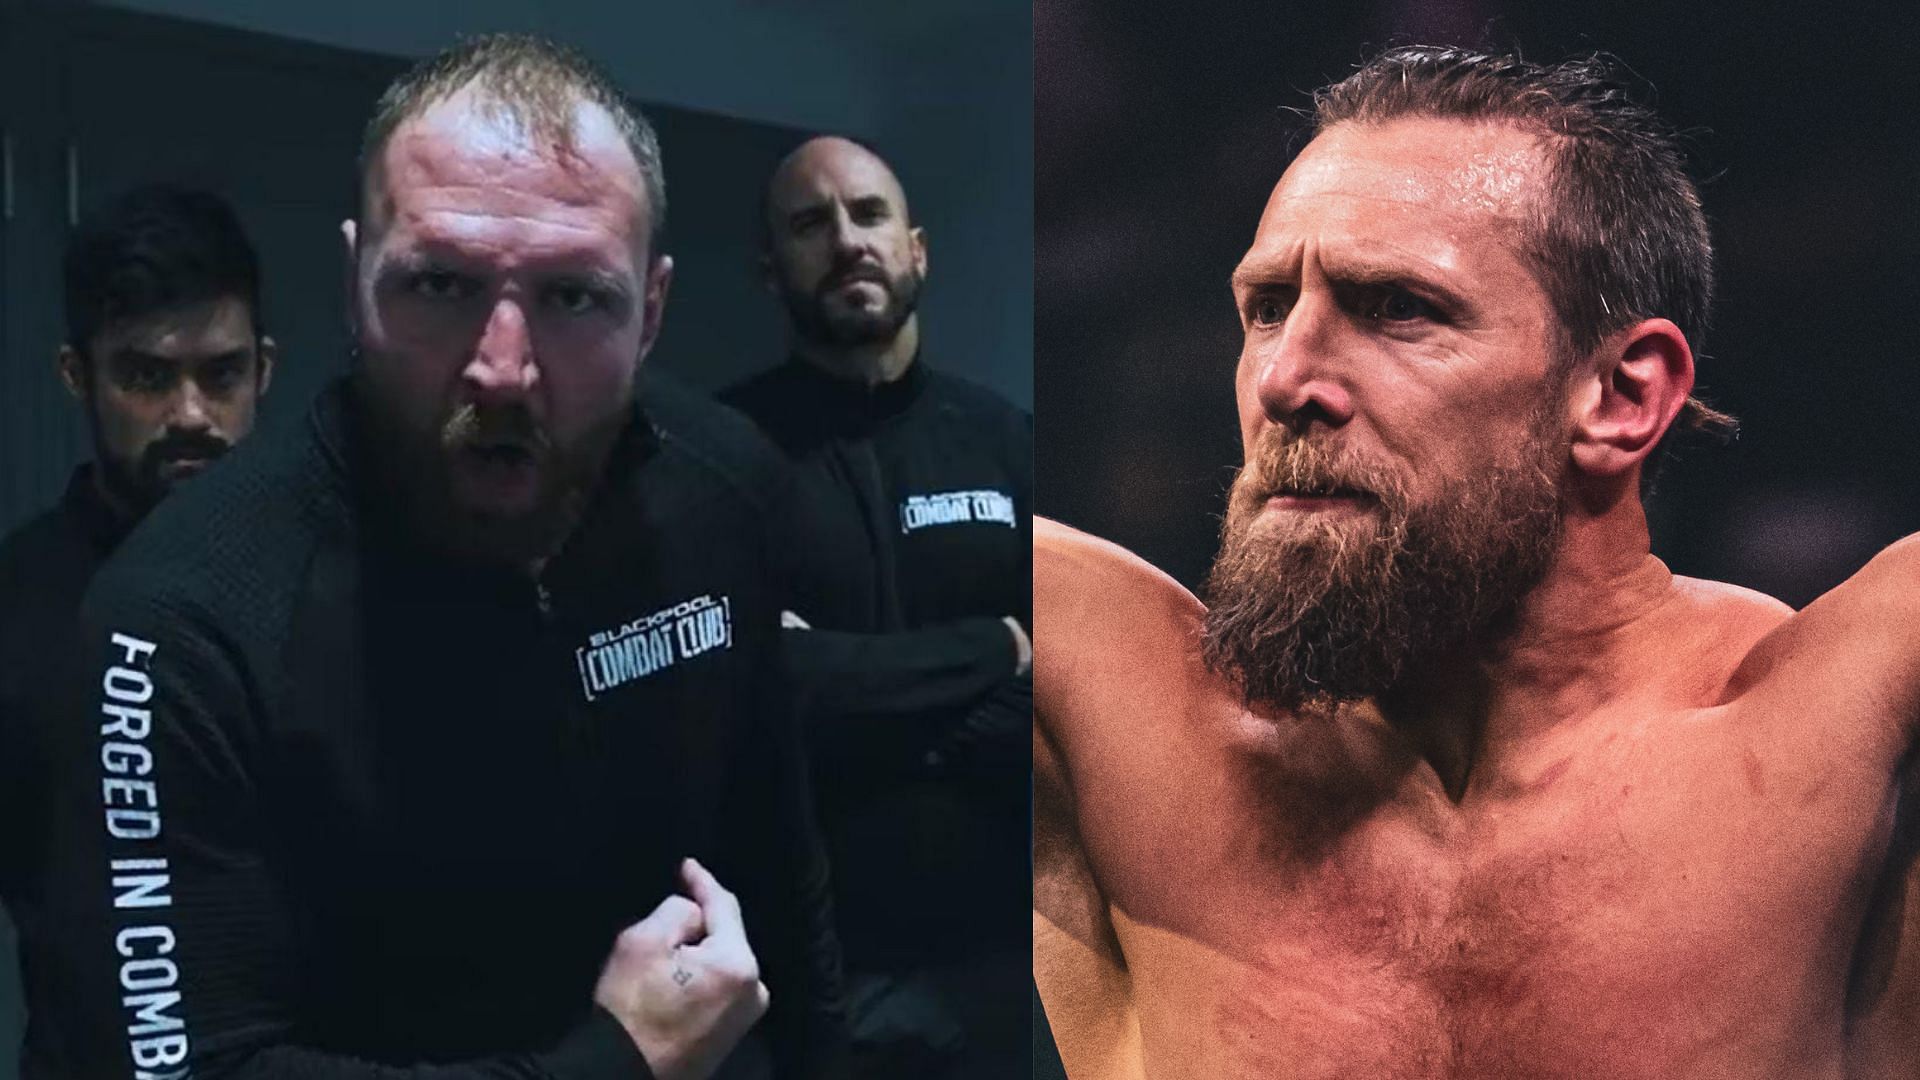 Could Bryan Danielson turn his back on the Blackpool Combat Club?